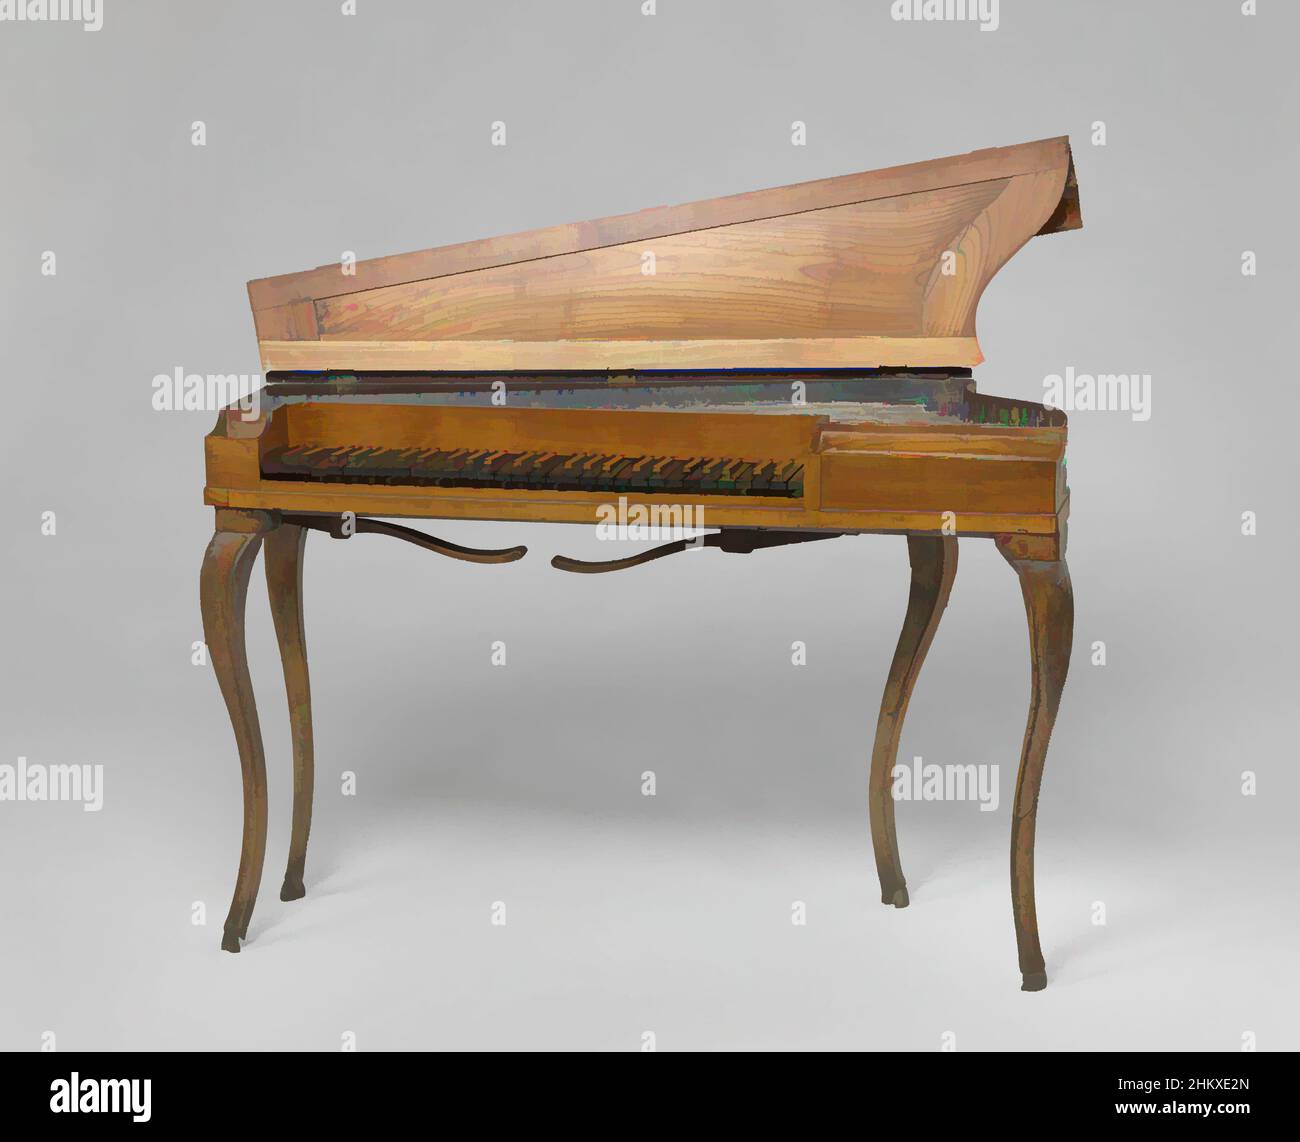 Art inspired by Piano, Lying-harp piano, Piano with pedals moved with the knee., Southern Germany, c. 1770 - c. 1775, cherry (wood), oak (wood), height 77.0 cm × width 117.0 cm × depth 49.0 cm, Classic works modernized by Artotop with a splash of modernity. Shapes, color and value, eye-catching visual impact on art. Emotions through freedom of artworks in a contemporary way. A timeless message pursuing a wildly creative new direction. Artists turning to the digital medium and creating the Artotop NFT Stock Photo